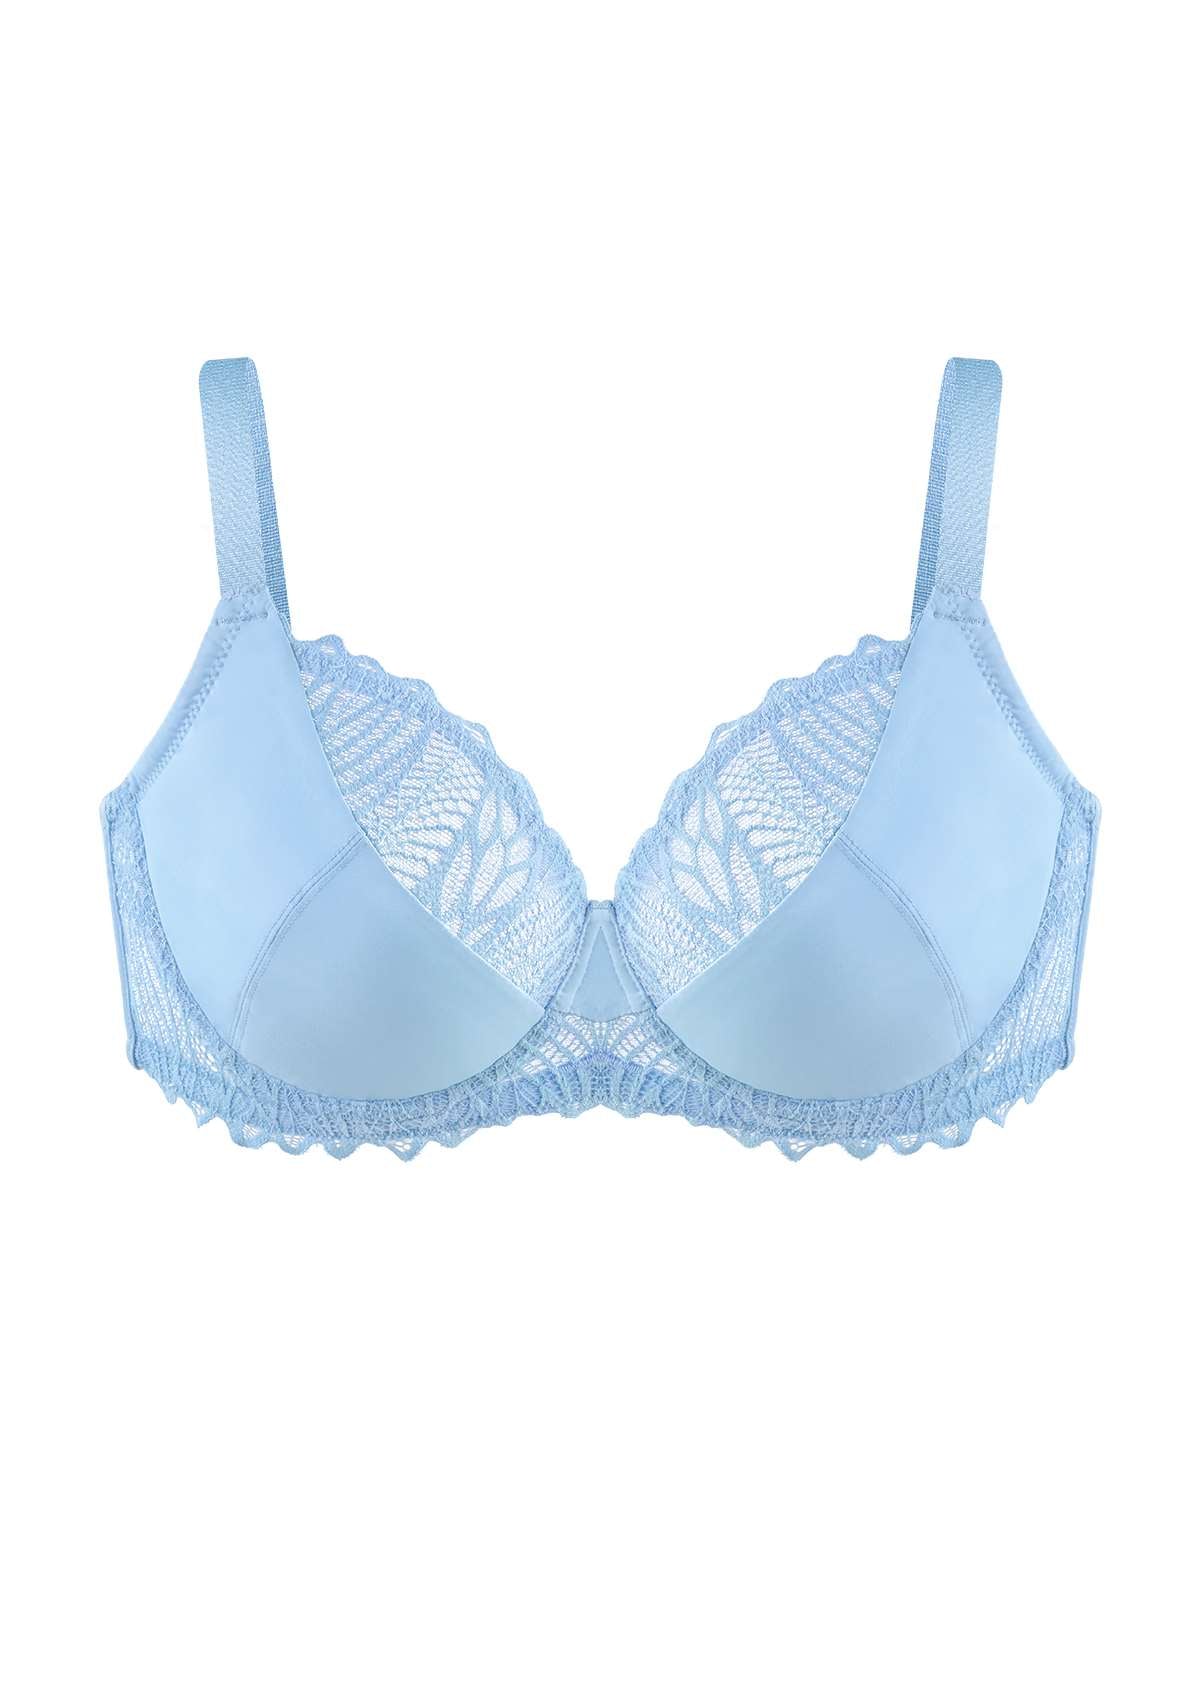 HSIA Pretty Secrets Lace-Trimmed Full Coverage Underwire Bra For Support - Light Pink / 36 / D